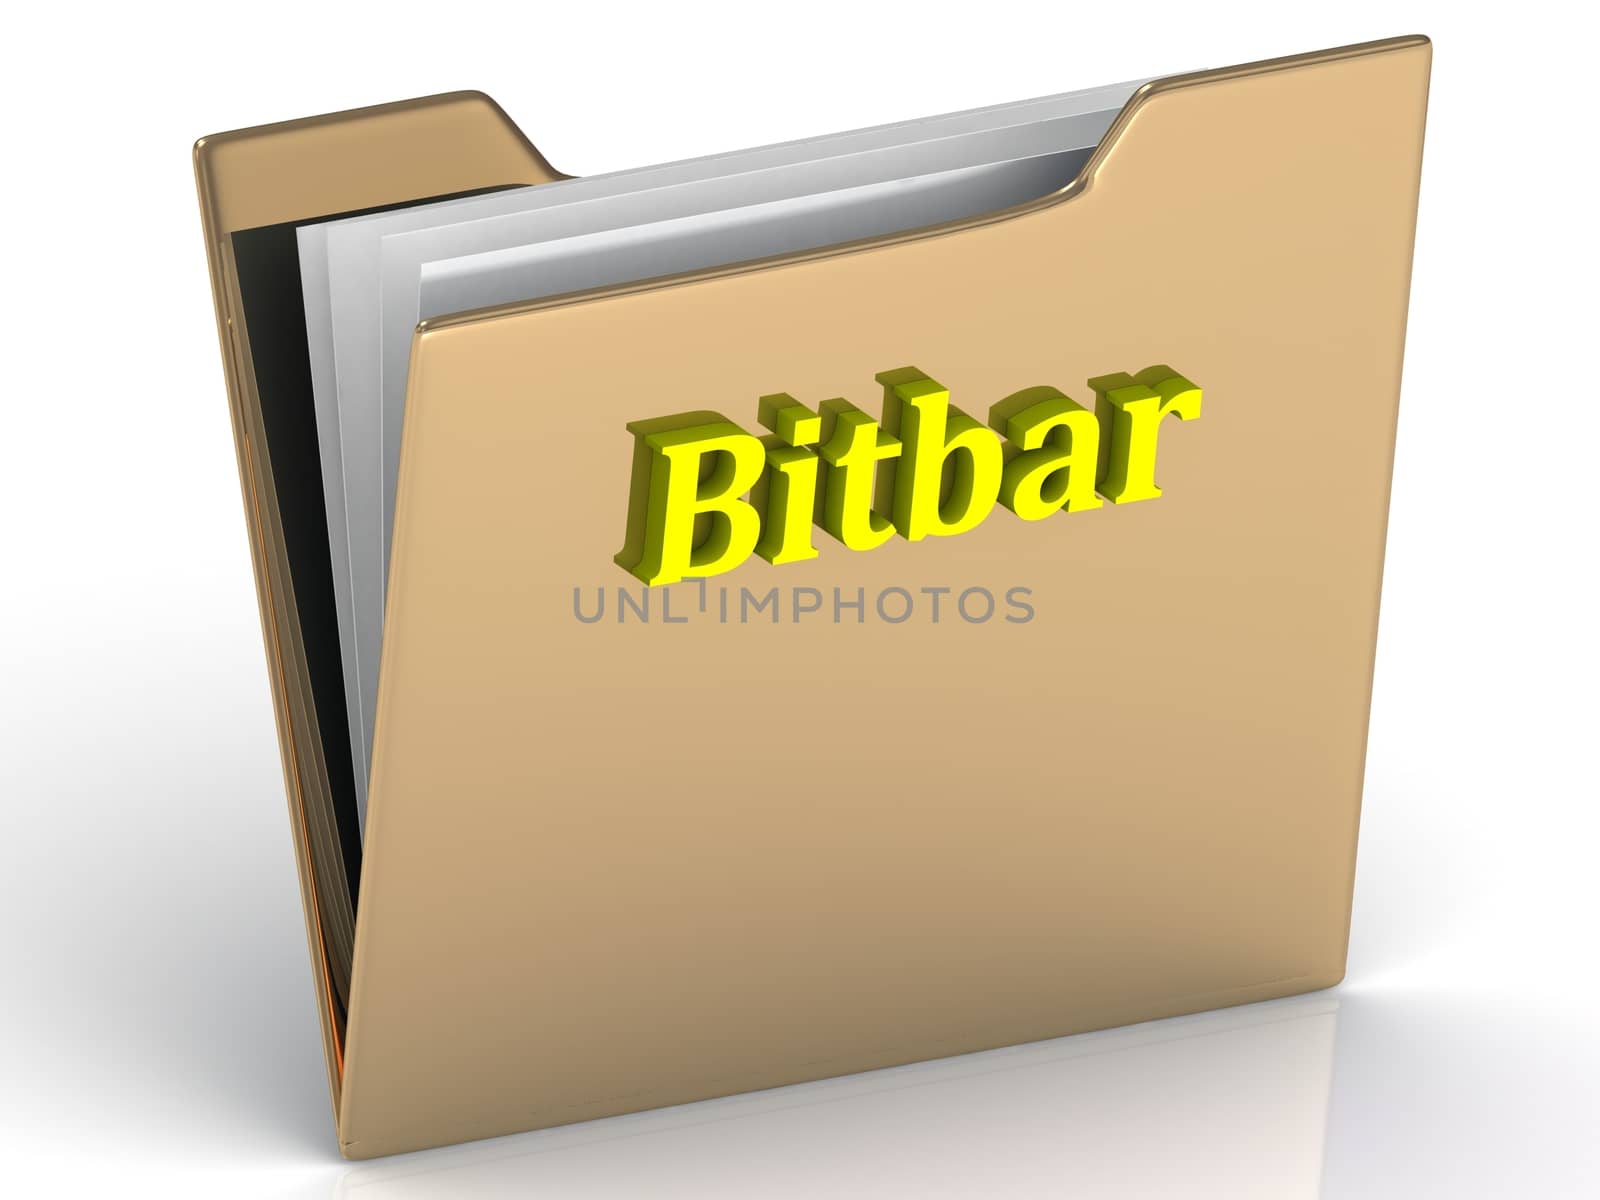 Bitbar- bright color letters on a gold folder on a white background